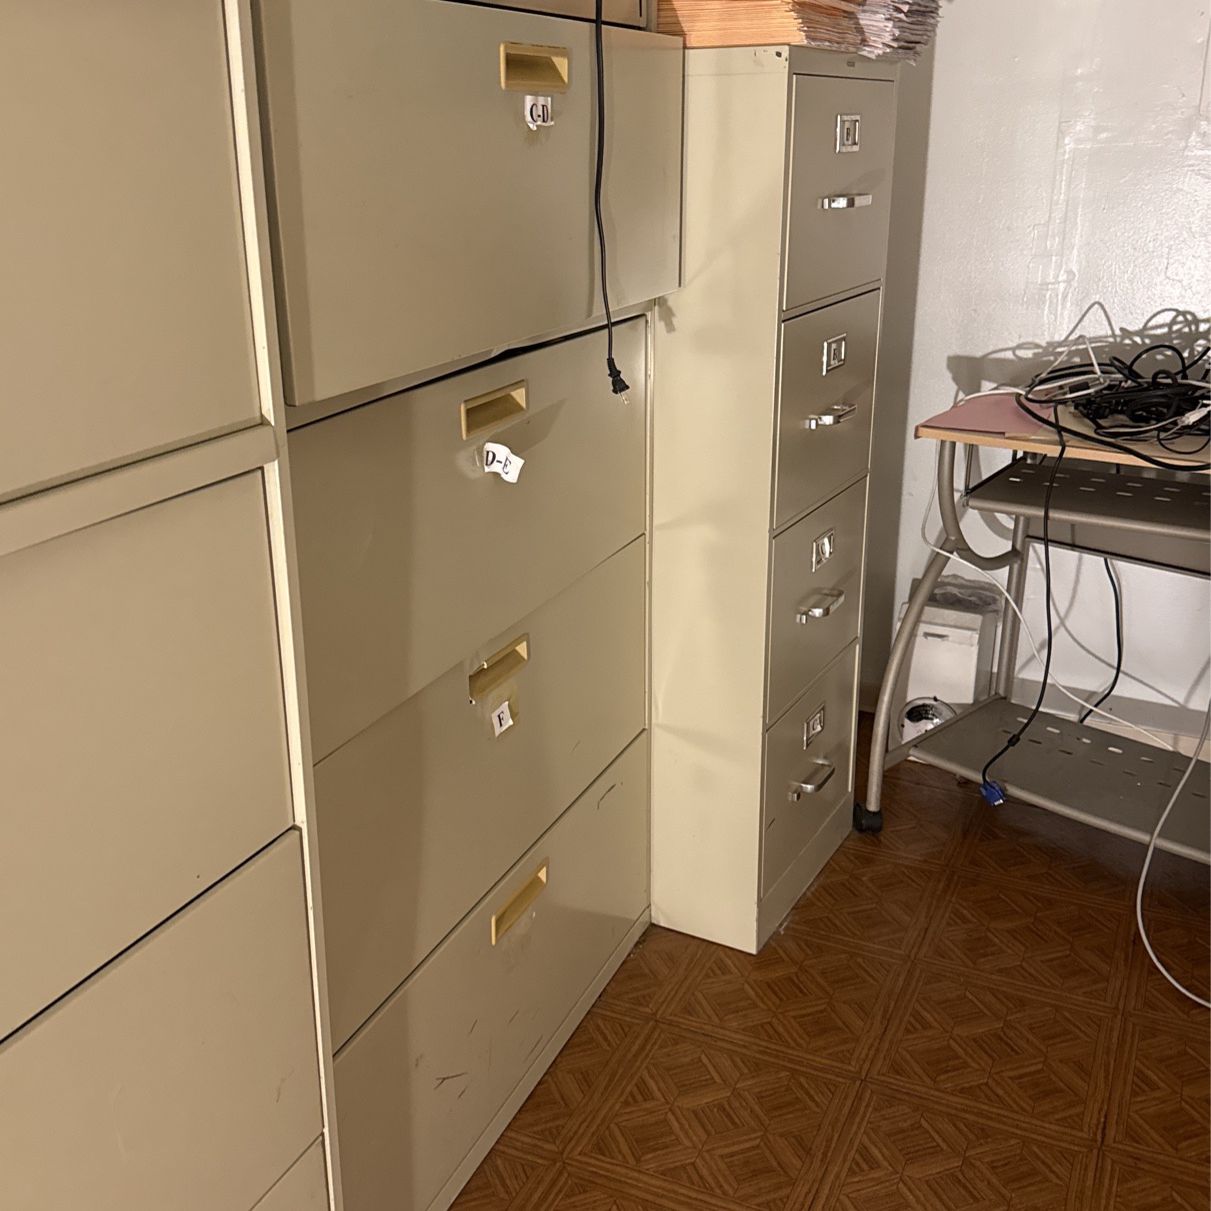 Filing Cabinets Beige O Black 4 Drawers 2 Drawers Or 5 Drawers 